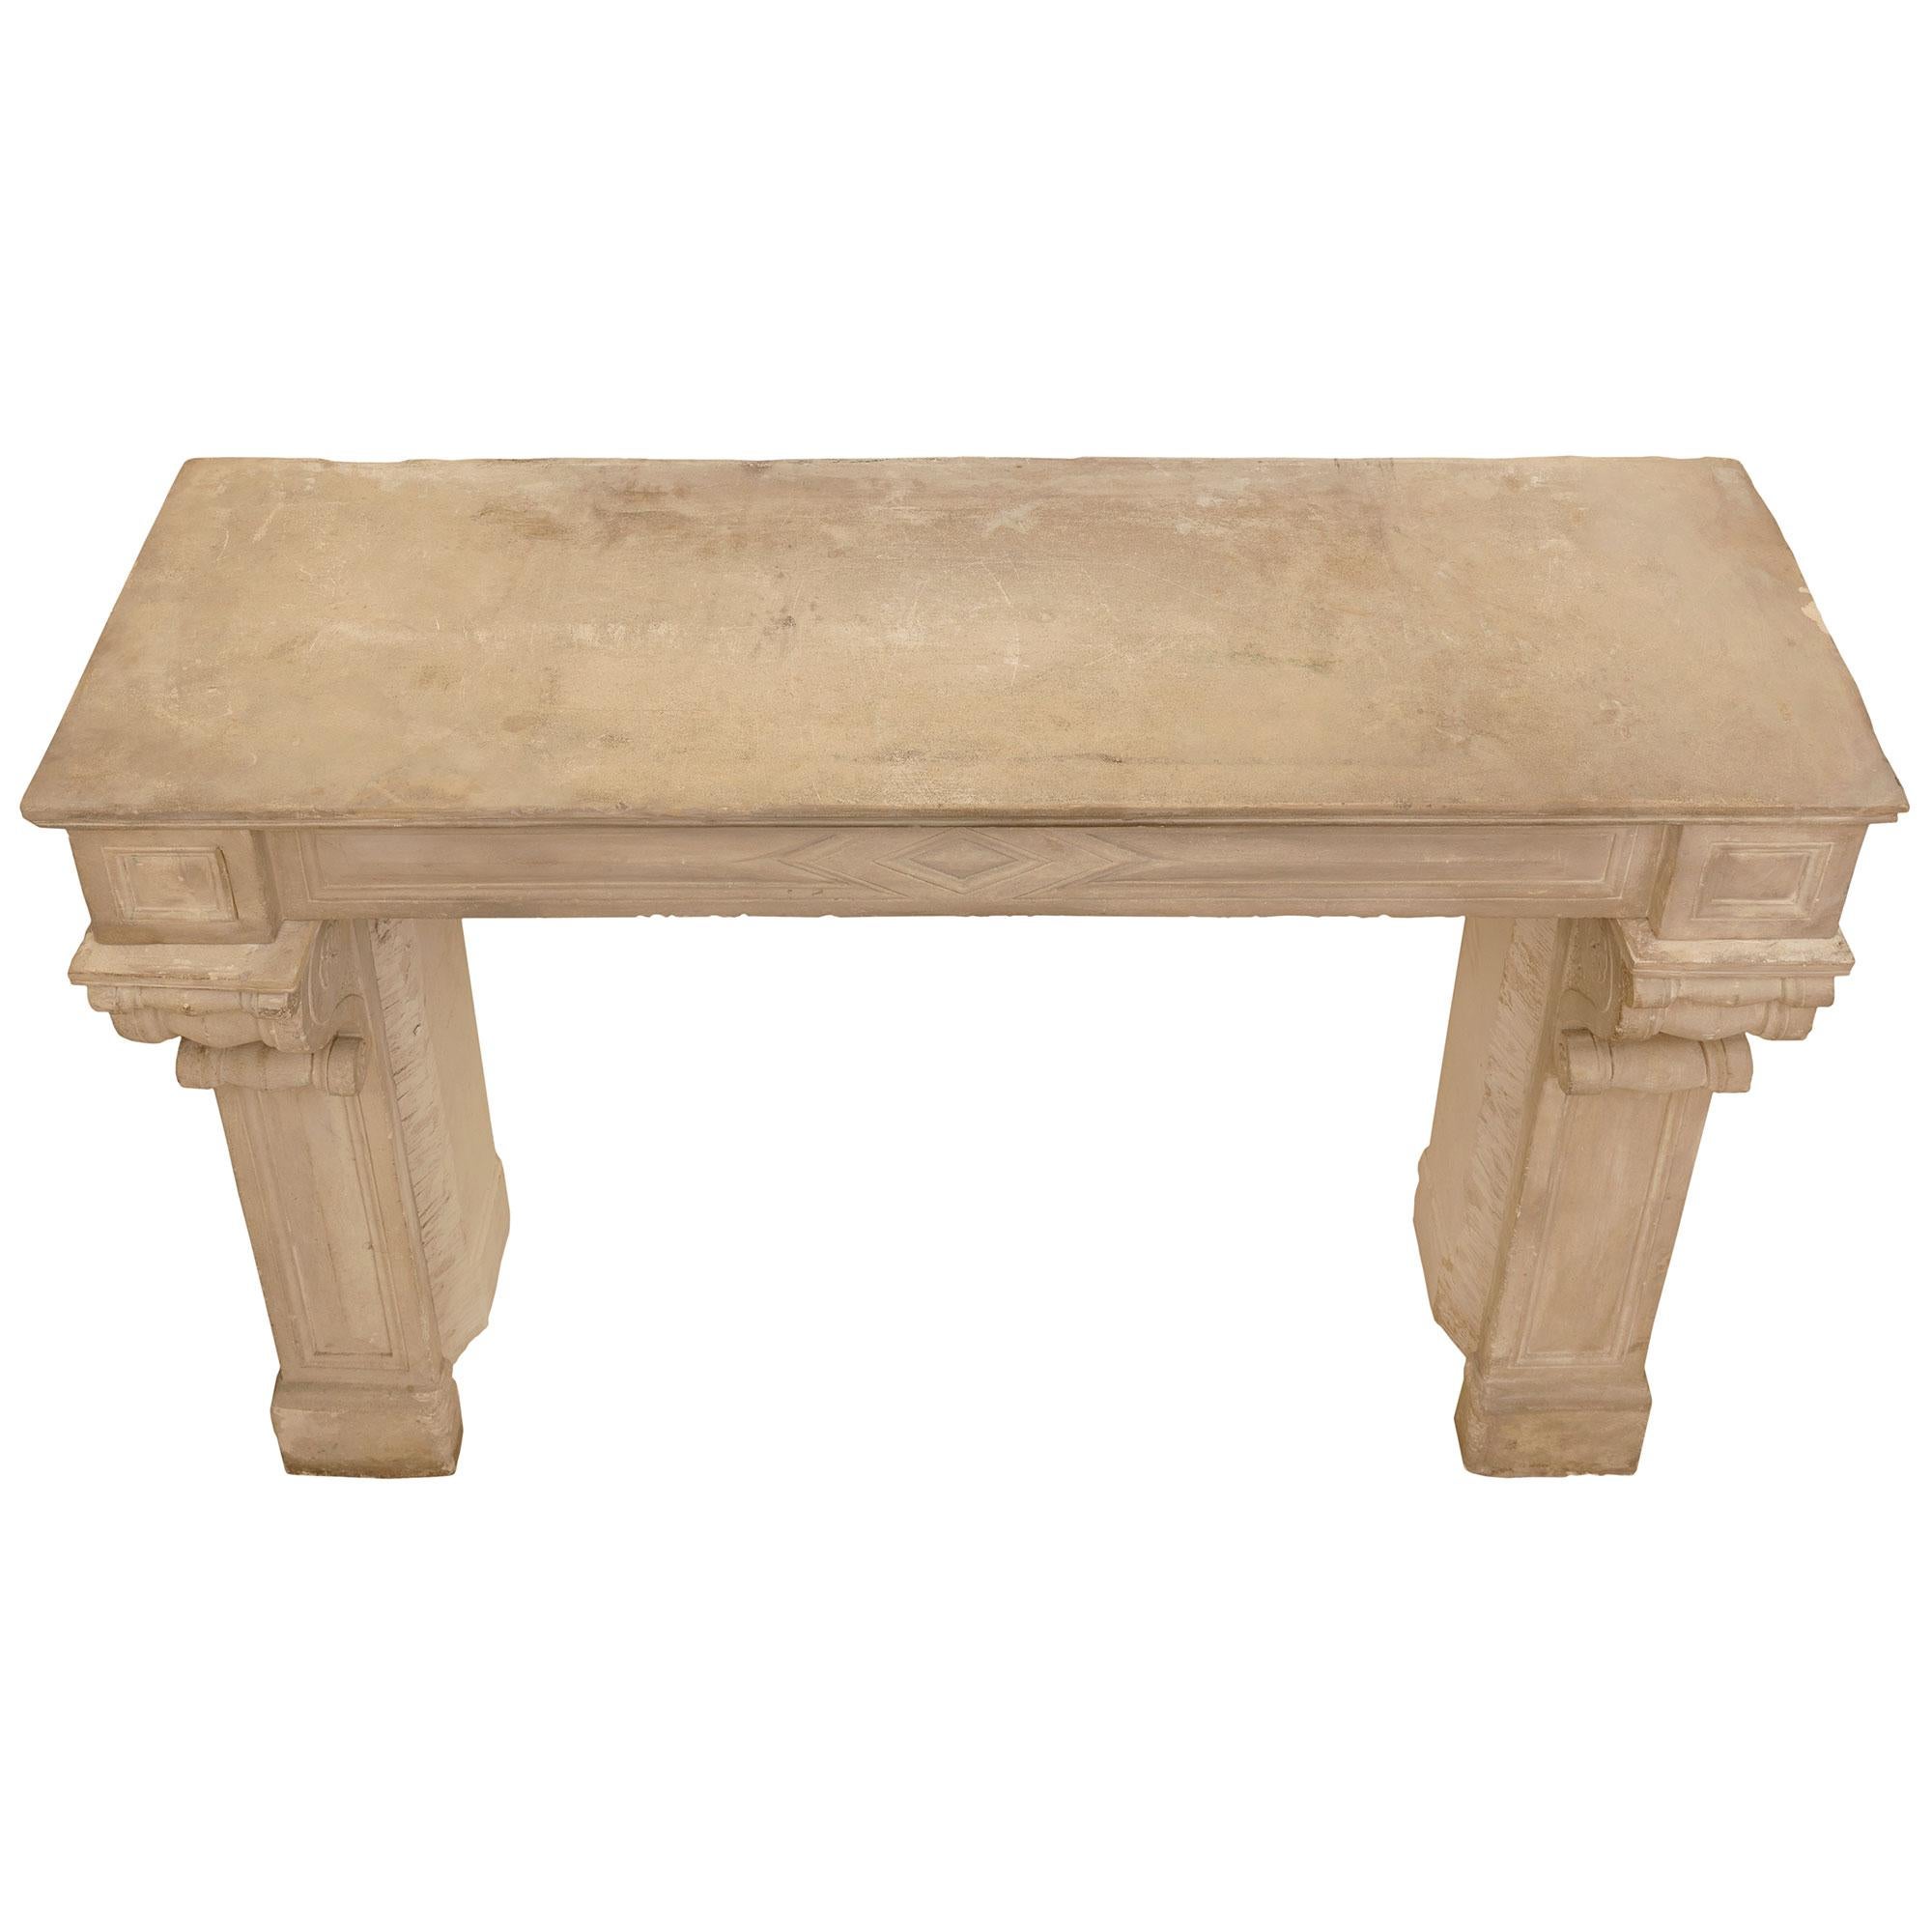 A most elegant French 19th century Louis XVI st. limestone mantel. The mantel is raised by fine block supports with elegant straight jambs, decorative mottled recessed panels and beautiful scrolled capital like movements. Above each jamb are